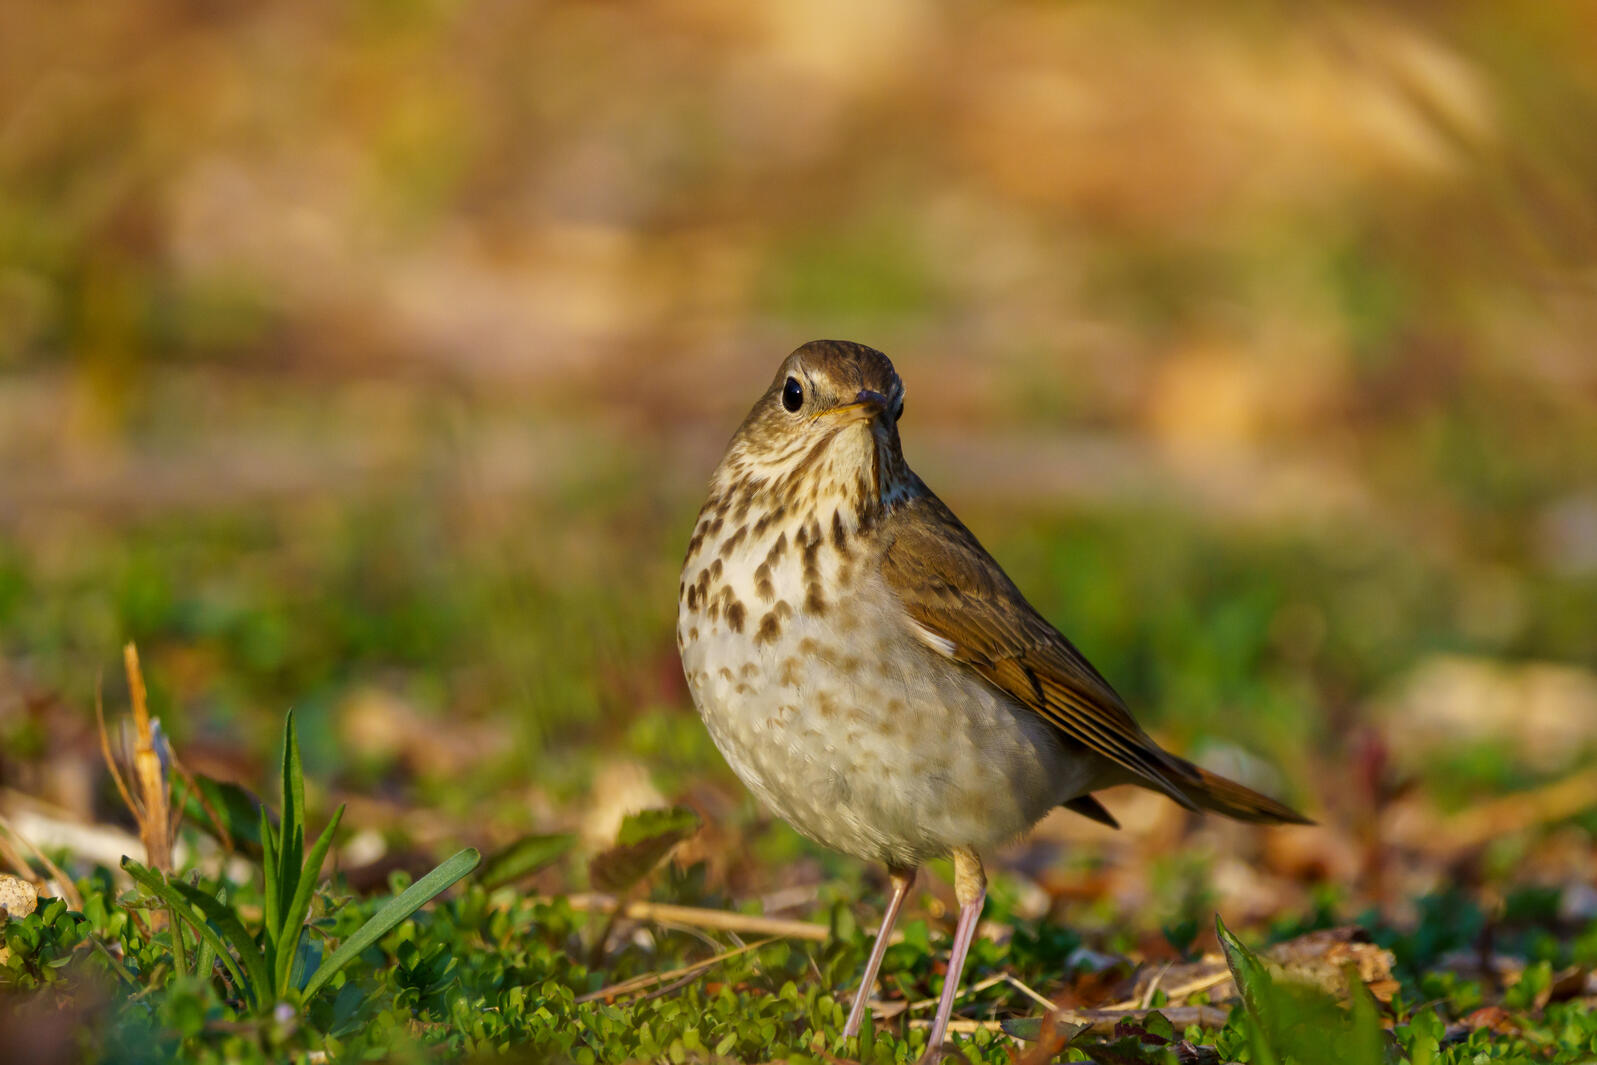 Hermit Thrush foraging for food